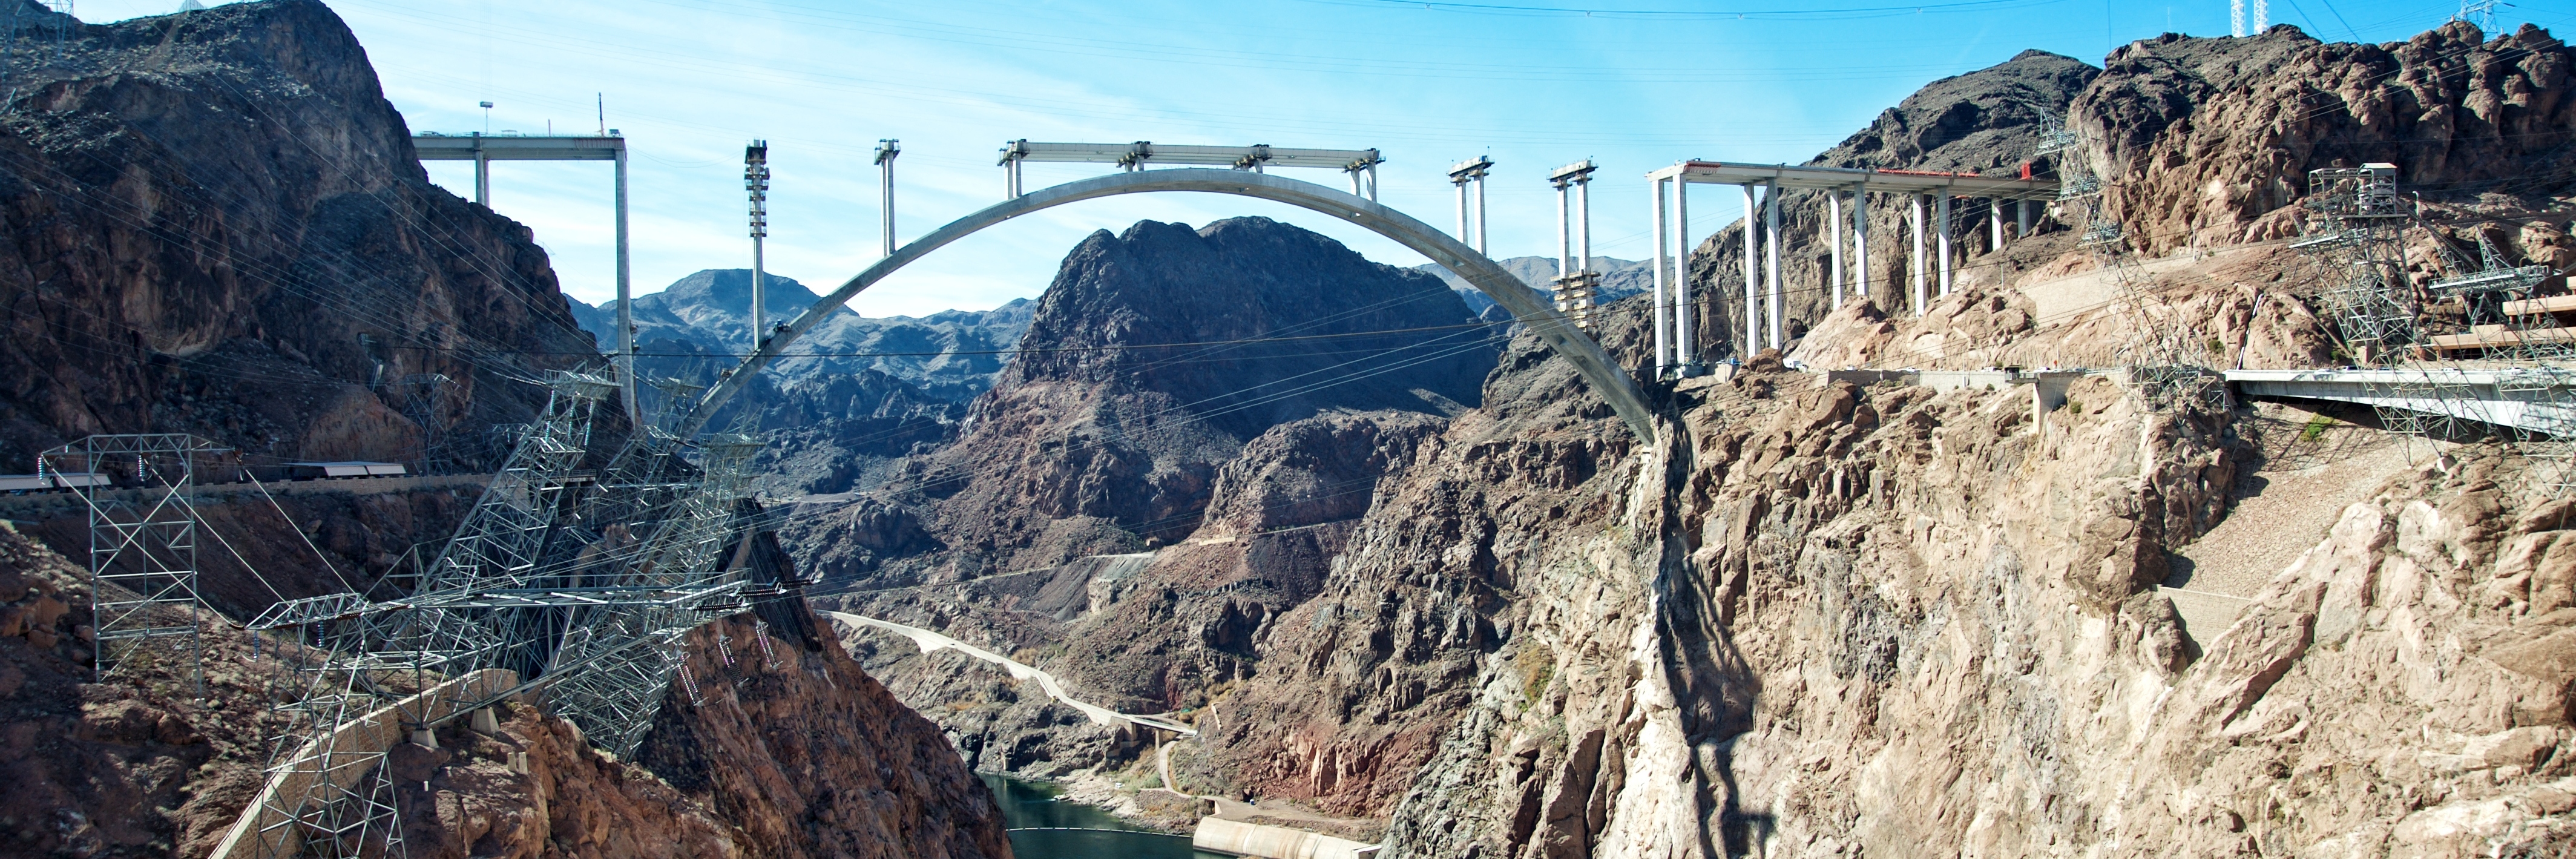 Hoover Dam and the Hoover Dam Bypass Bridge during construction  